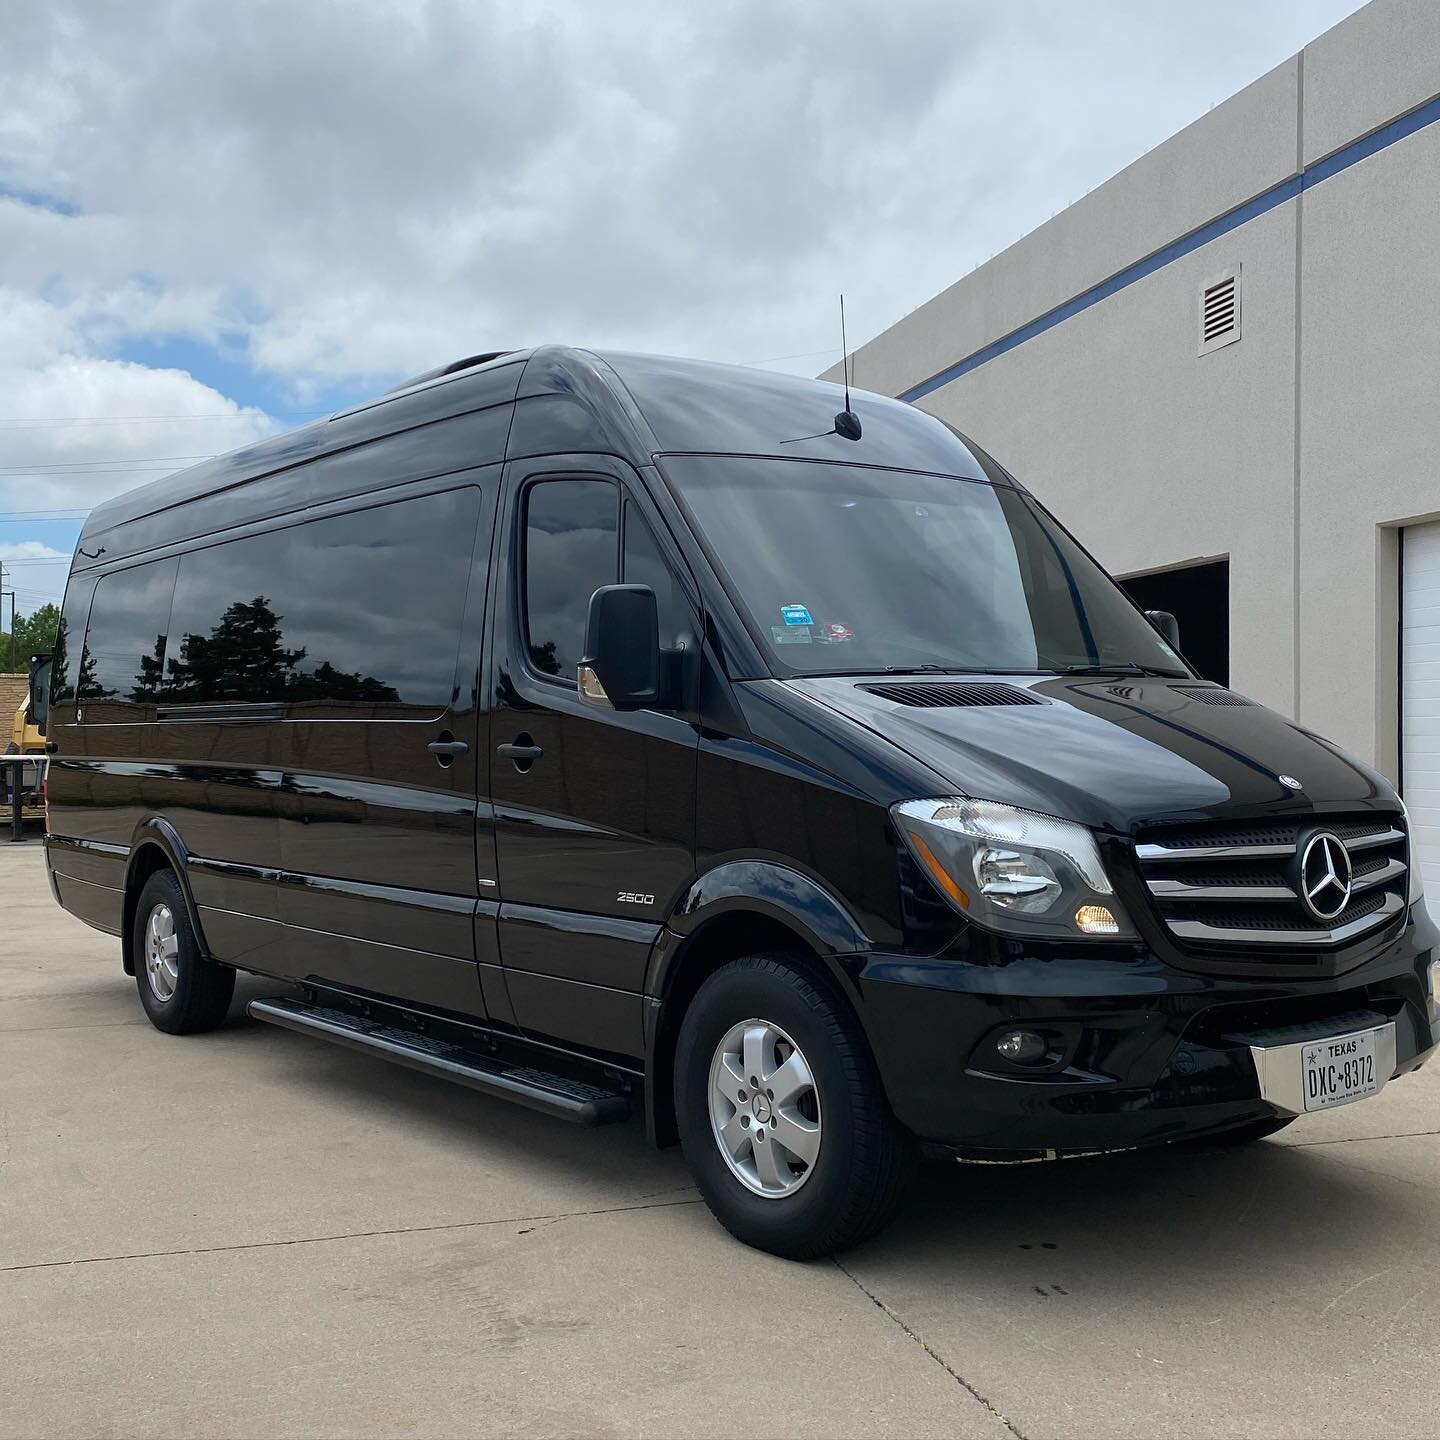 Happy to say that after the many hours that went into polishing this Sprinter, the  new client would like to have the remaining fleet detailed by Philthy&rsquo;s. 

A great deal of the credit goes to @shelbybeckworth for working nonstop on this beast